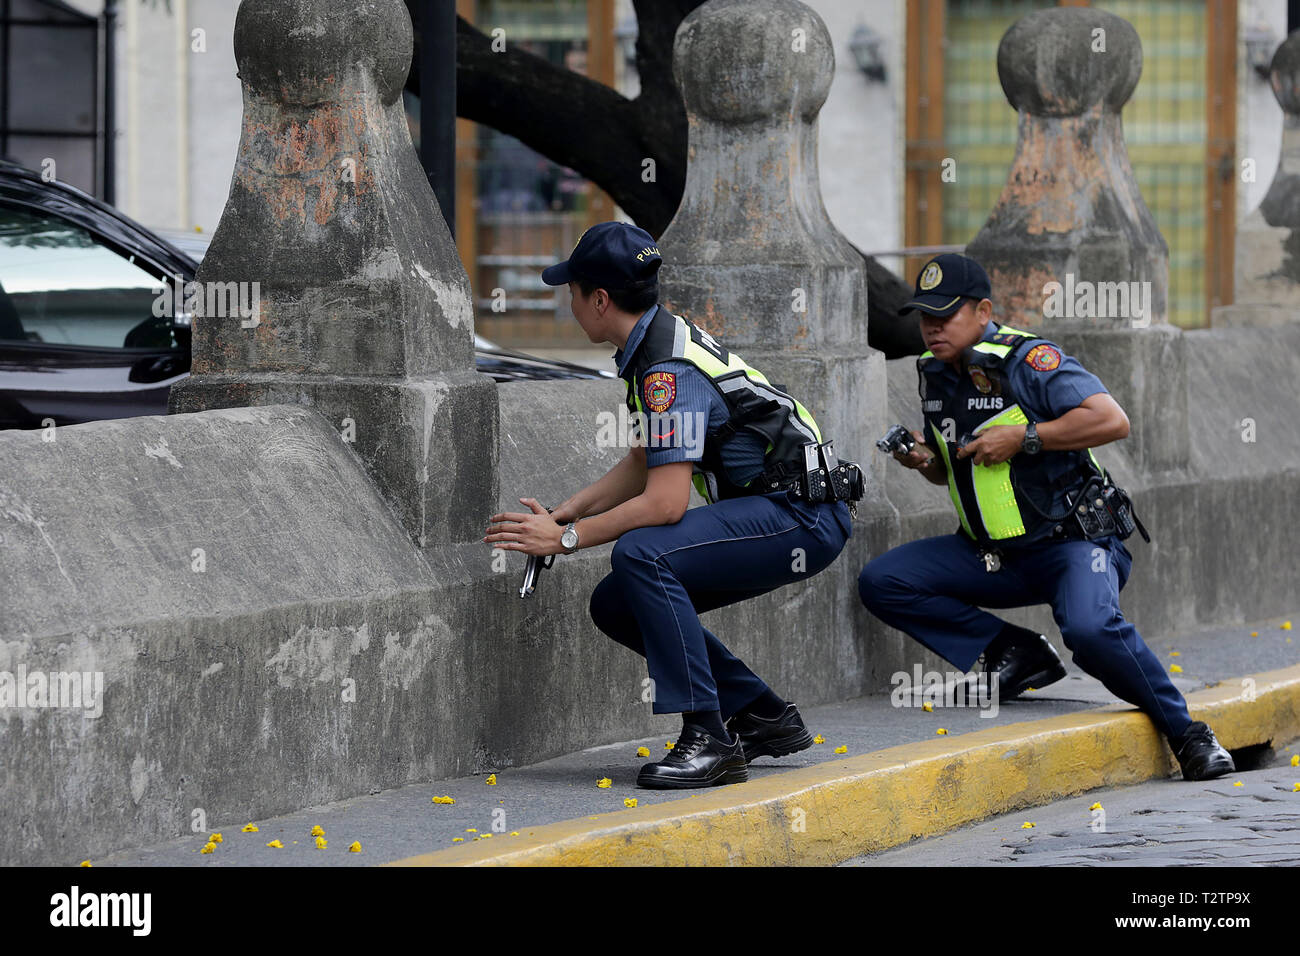 Manila, Philippines. 4th Apr, 2019. Members of the Philippine National Police (PNP) participate in an anti-terrorism drill in Manila, the Philippines, April 4, 2019. Philippine security forces have tightened security after Wednesday's blast in southern Philippine Isulan town in Sultan Kudarat province that wounded 18 people at least, a military general said on Thursday. Credit: Rouelle Umali/Xinhua/Alamy Live News Stock Photo